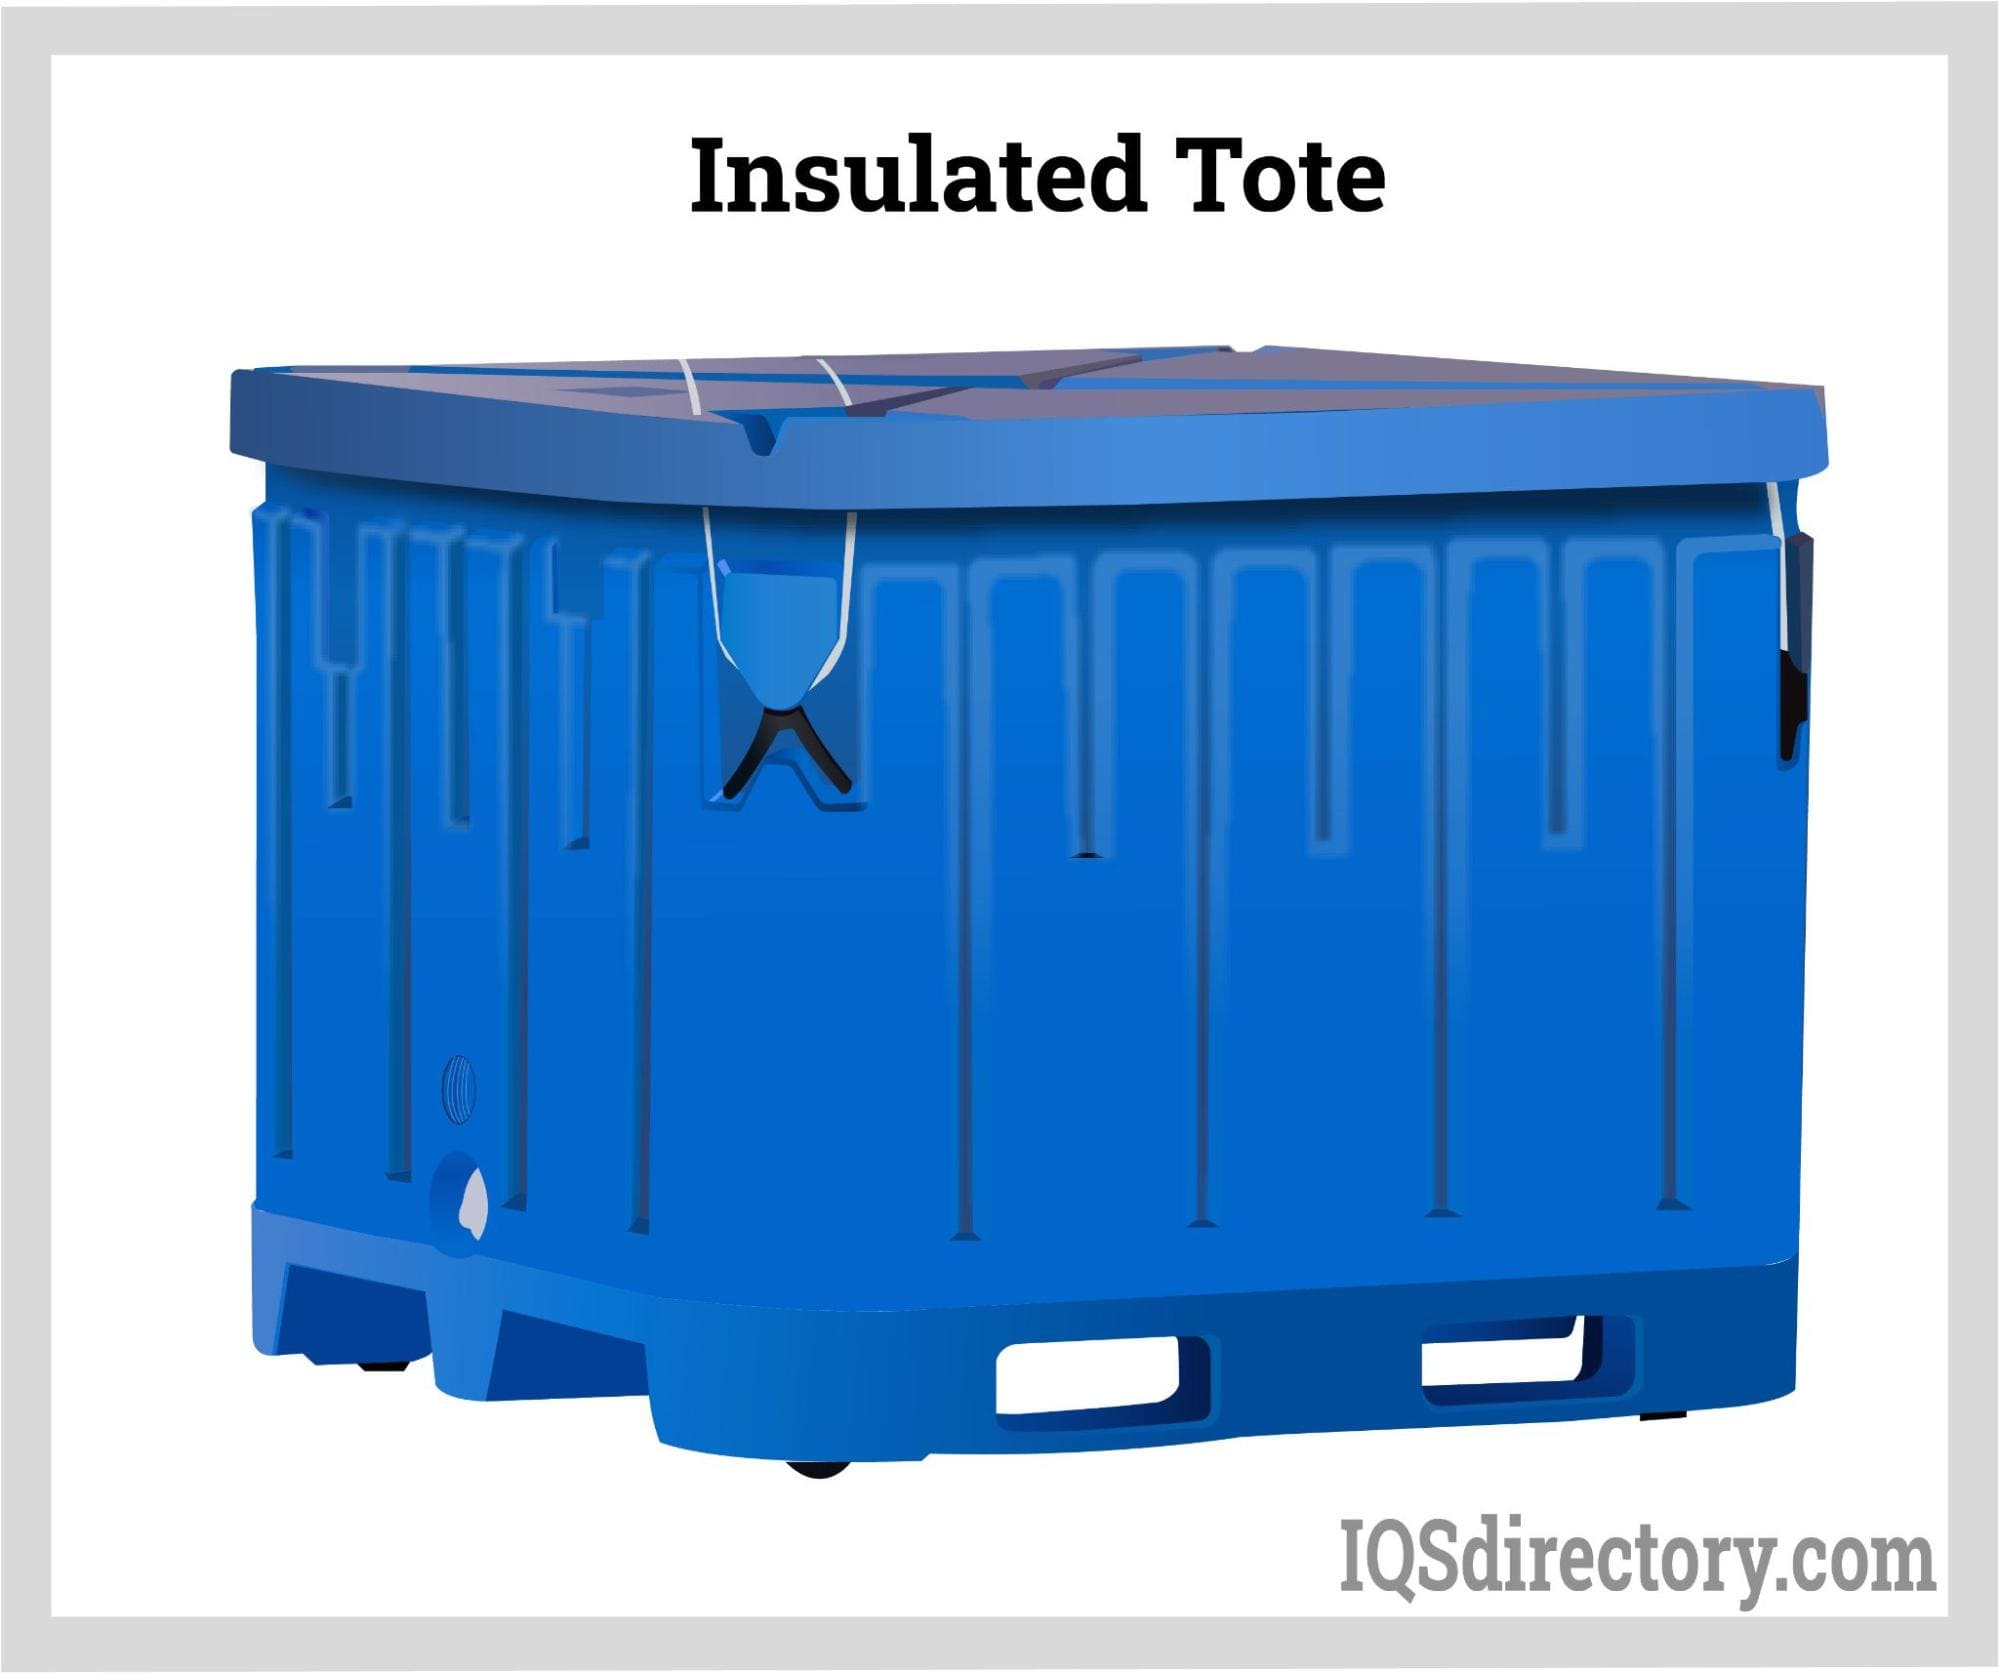 https://www.plastic-containers.net/wp-content/uploads/2023/02/insulated-tote.jpg